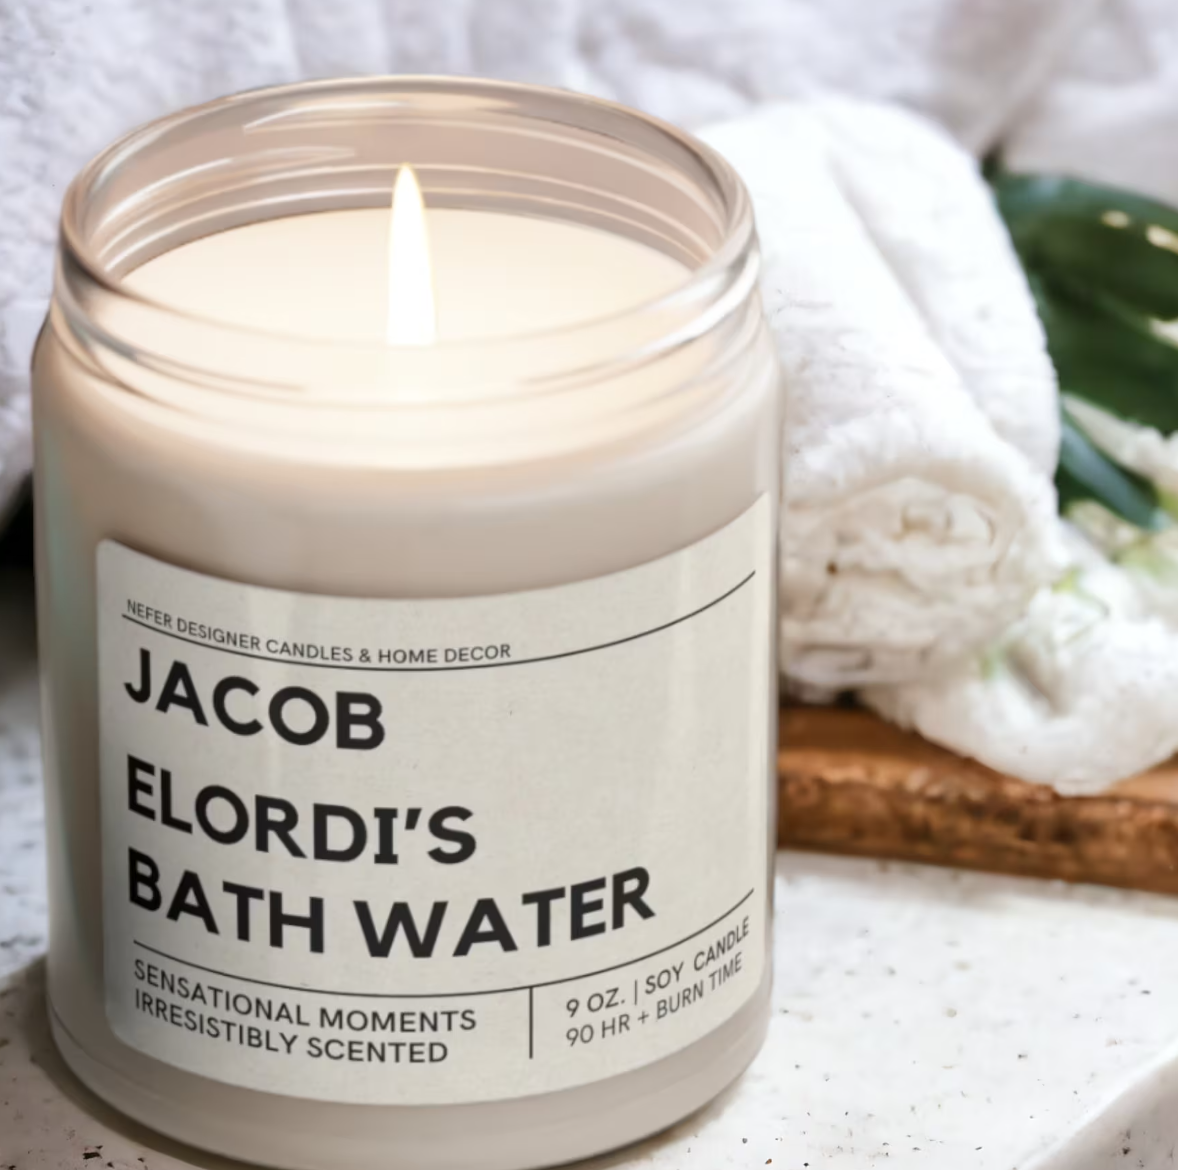 Jacob Elordi's Bath Water Candle | The Saltburn Candle | Customize Scent